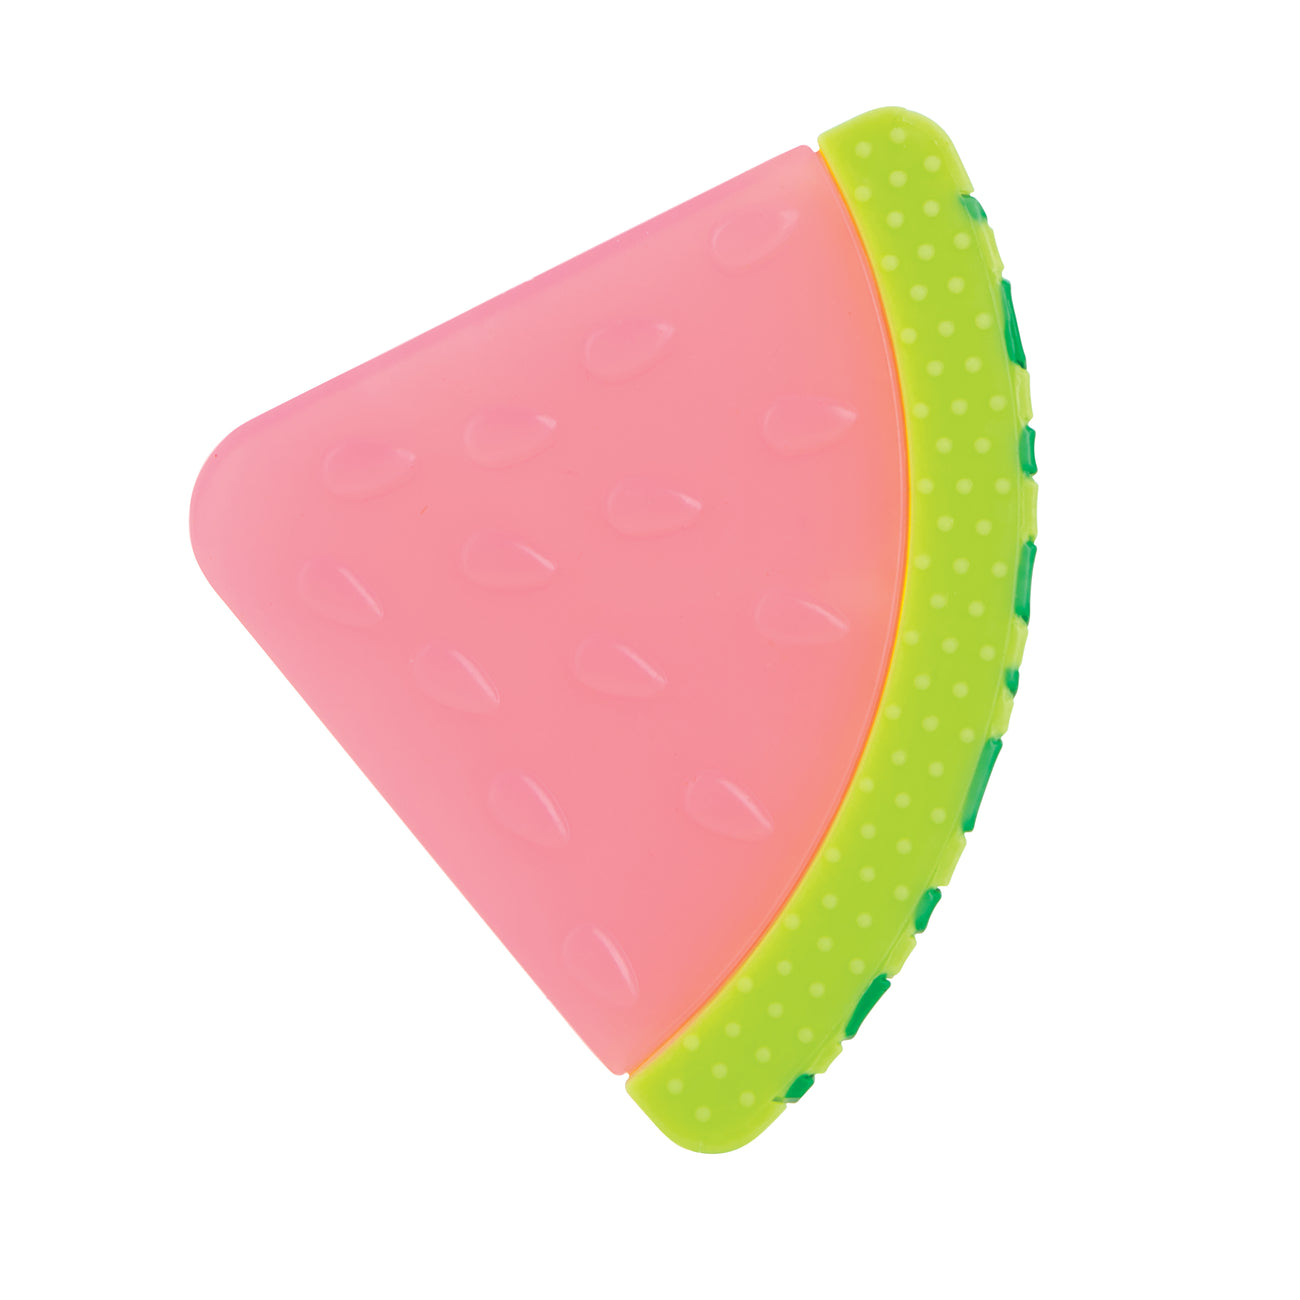 Silicone Teether - Watermelon - Nuby US